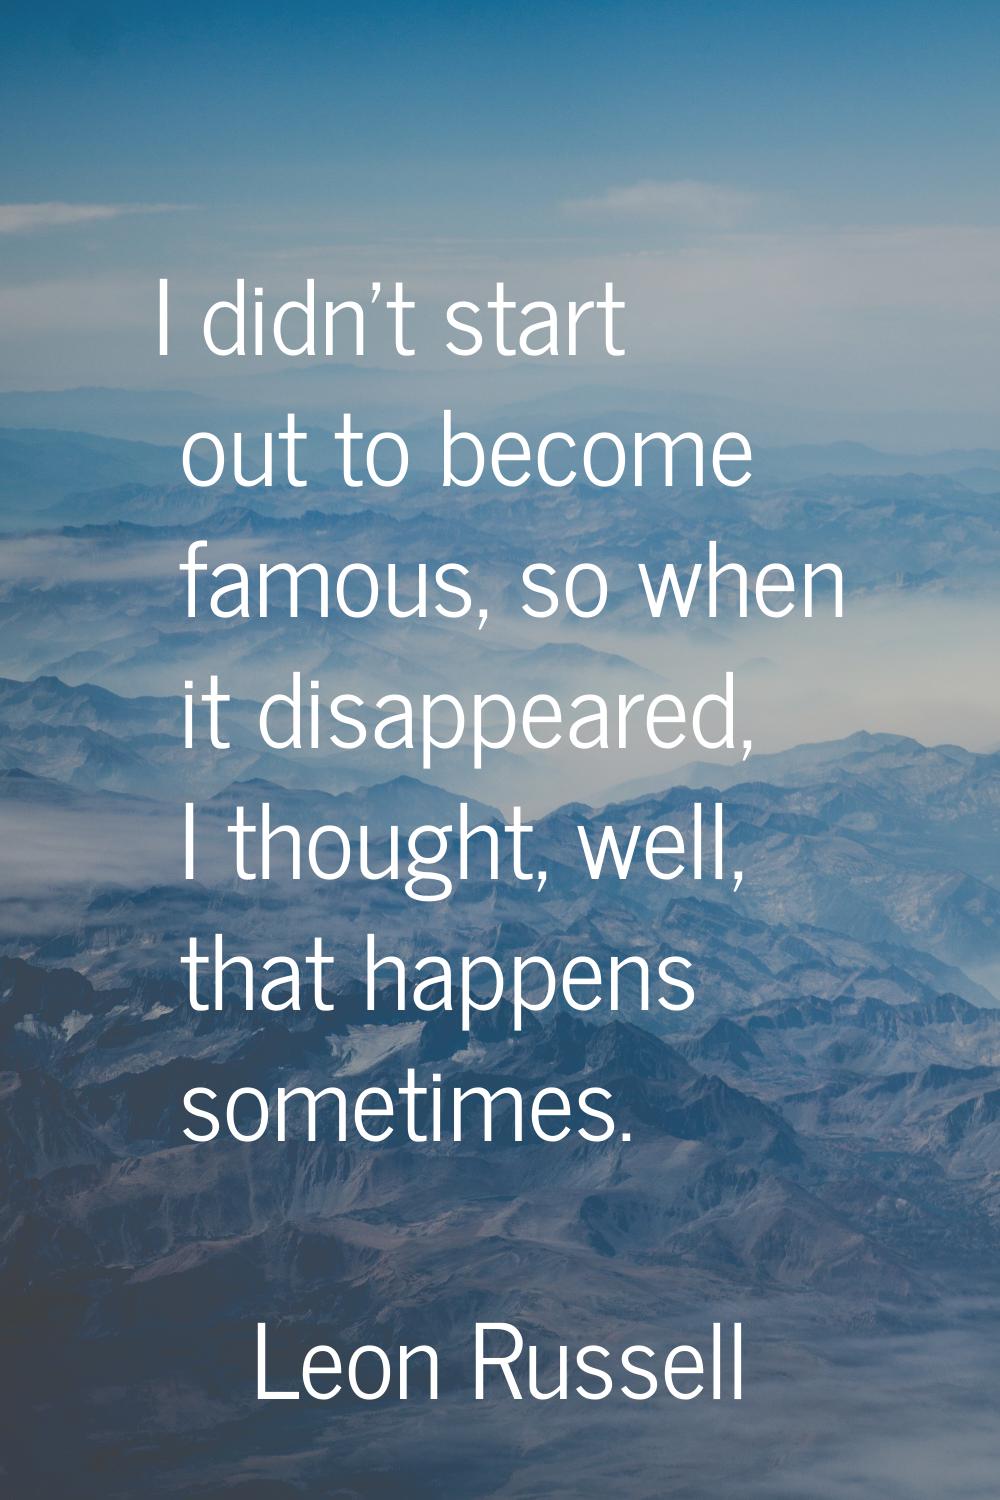 I didn't start out to become famous, so when it disappeared, I thought, well, that happens sometime